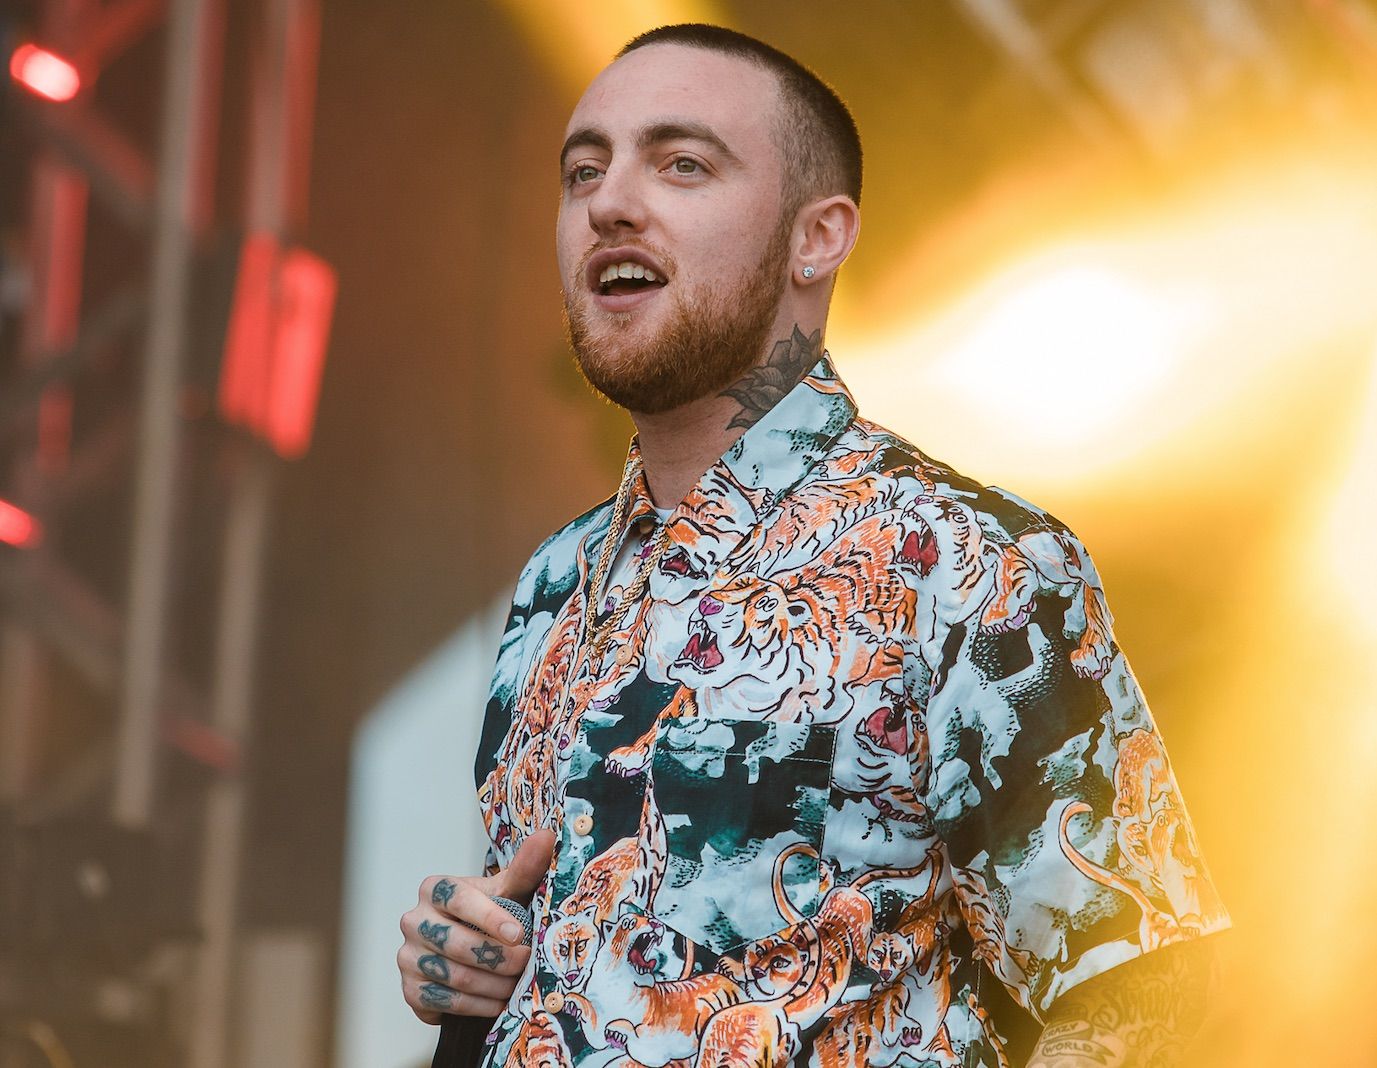 Amerpali Xxx Video Hd Sex - Rapper Mac Miller death leads to arrest nearly one year later